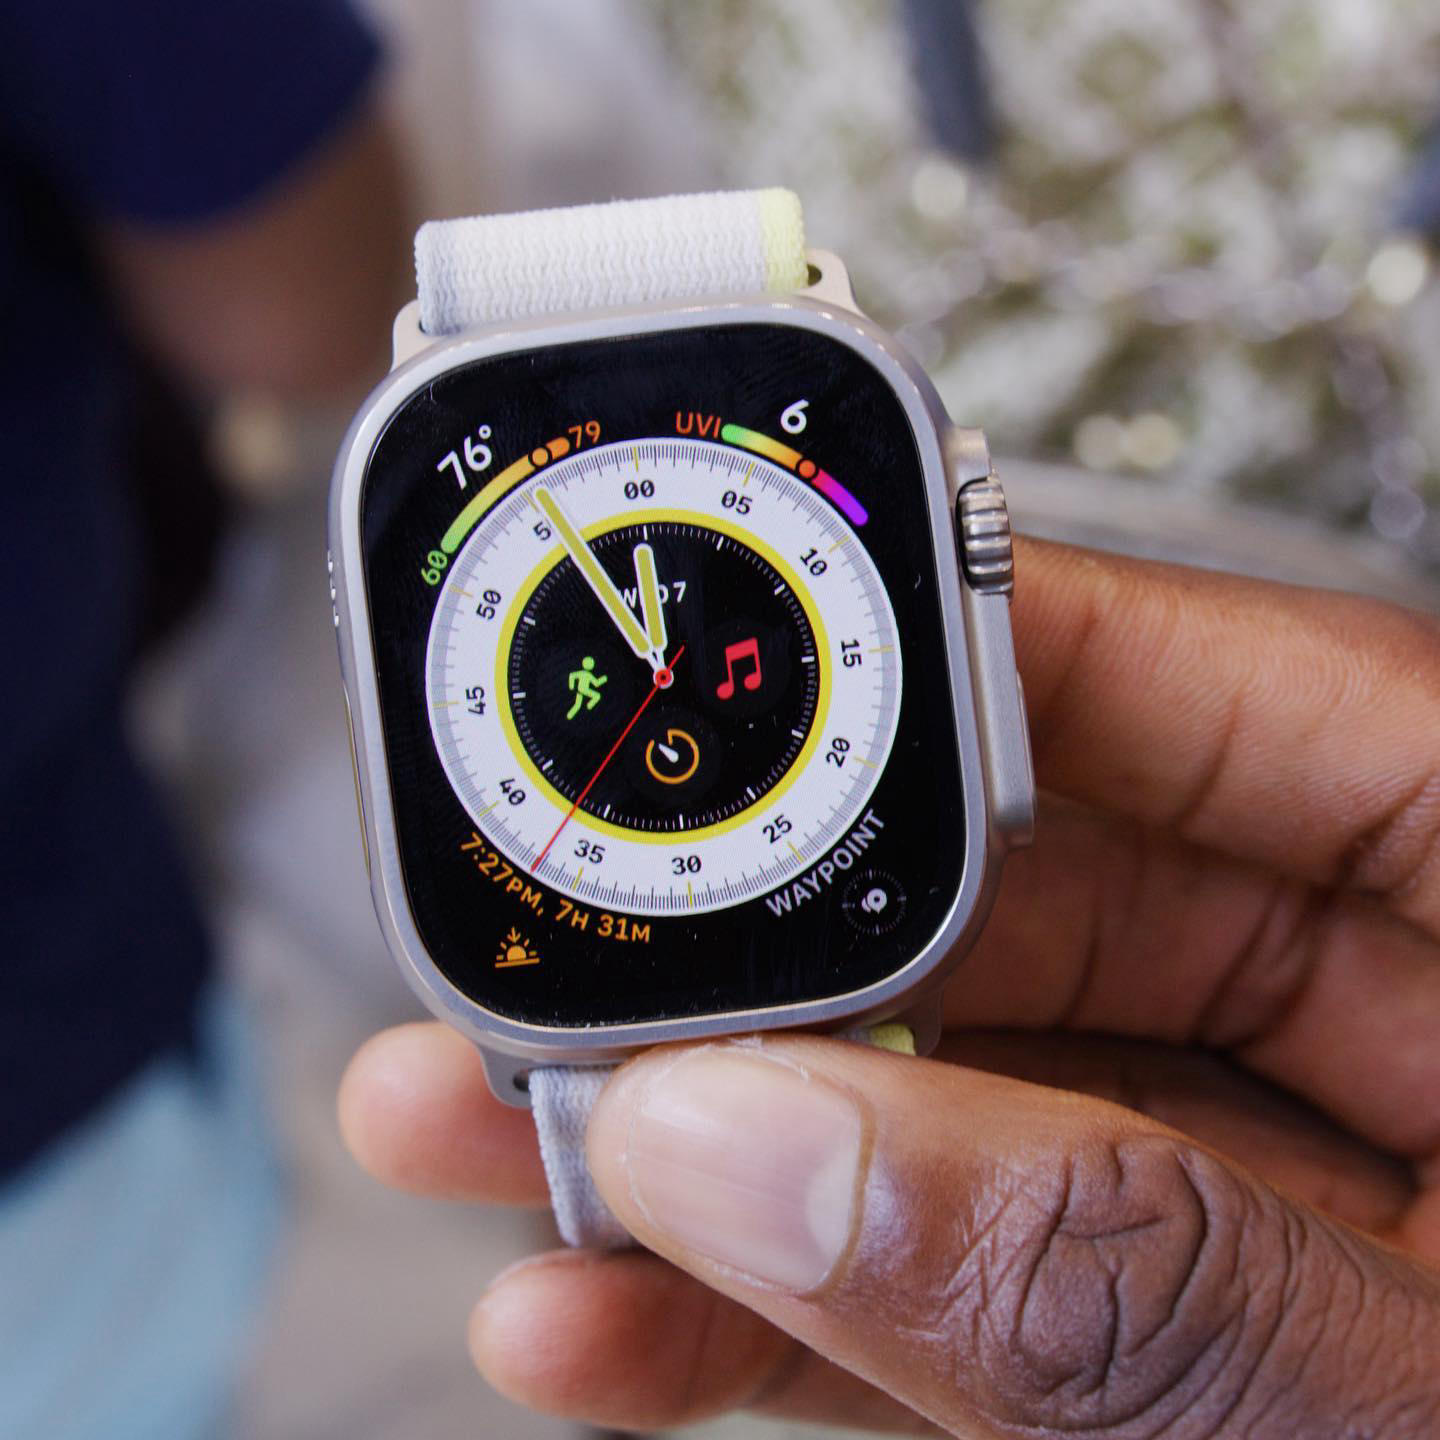 Marques Brownlee - The new Apple Watch Ultra is THICCC but with how many c's